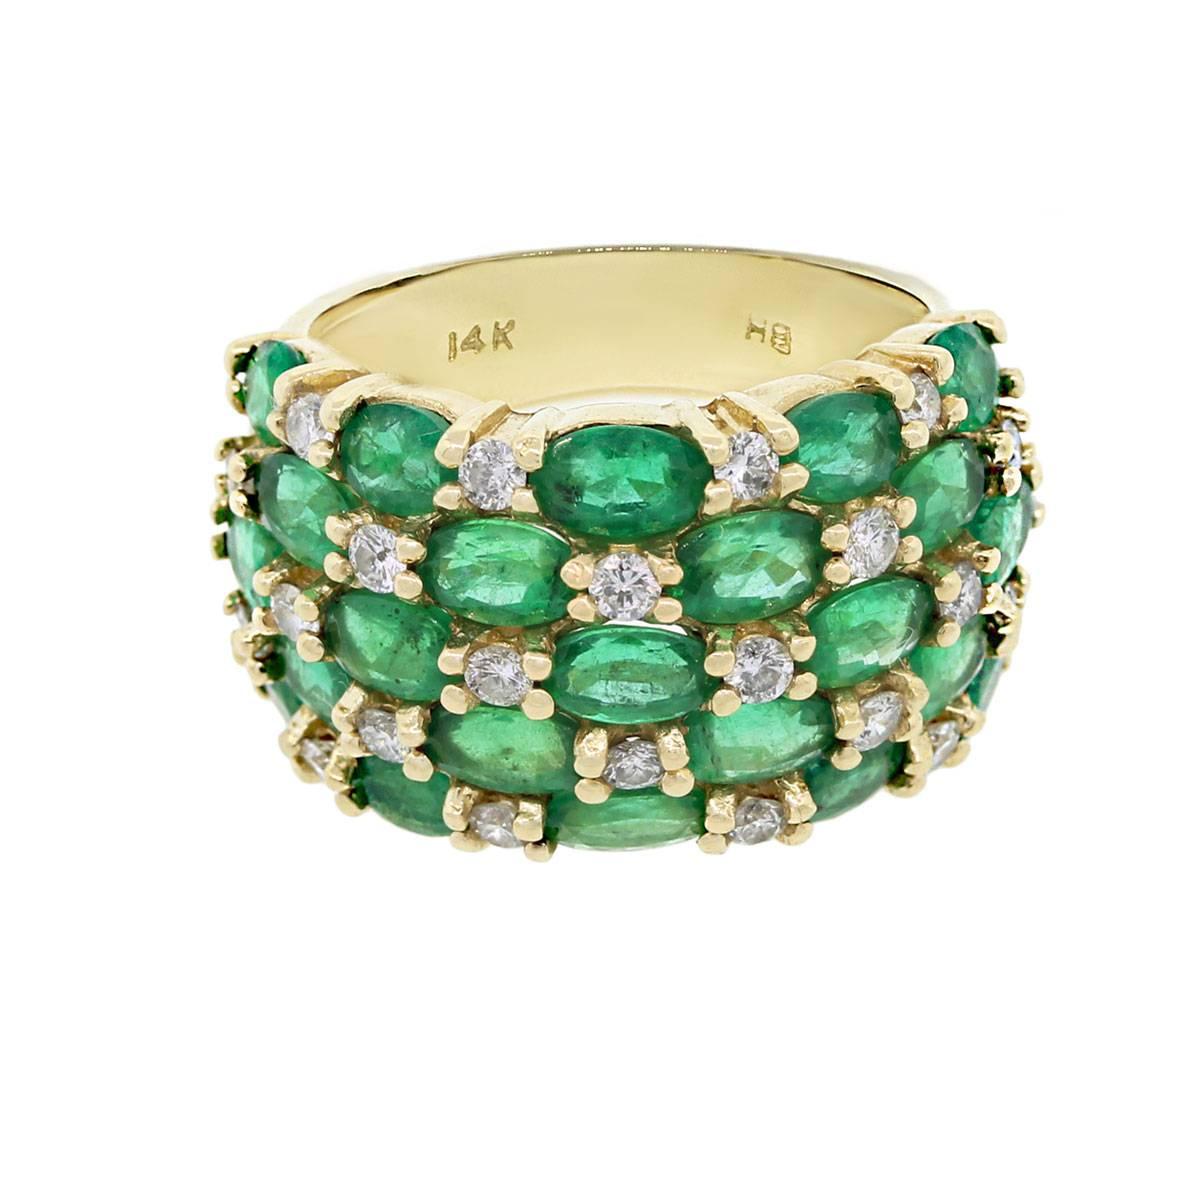 Style: 14k Yellow Gold 0.66ctw Diamond Emerald Multi Row Ring
Material: 14k Yellow Gold
Gemstone Details: Approximately 3.45ctw in Emeralds
Diamond Details: Approximately 0.66ctw in Diamonds, G/H in color and VS in clarity
Ring Measurements: